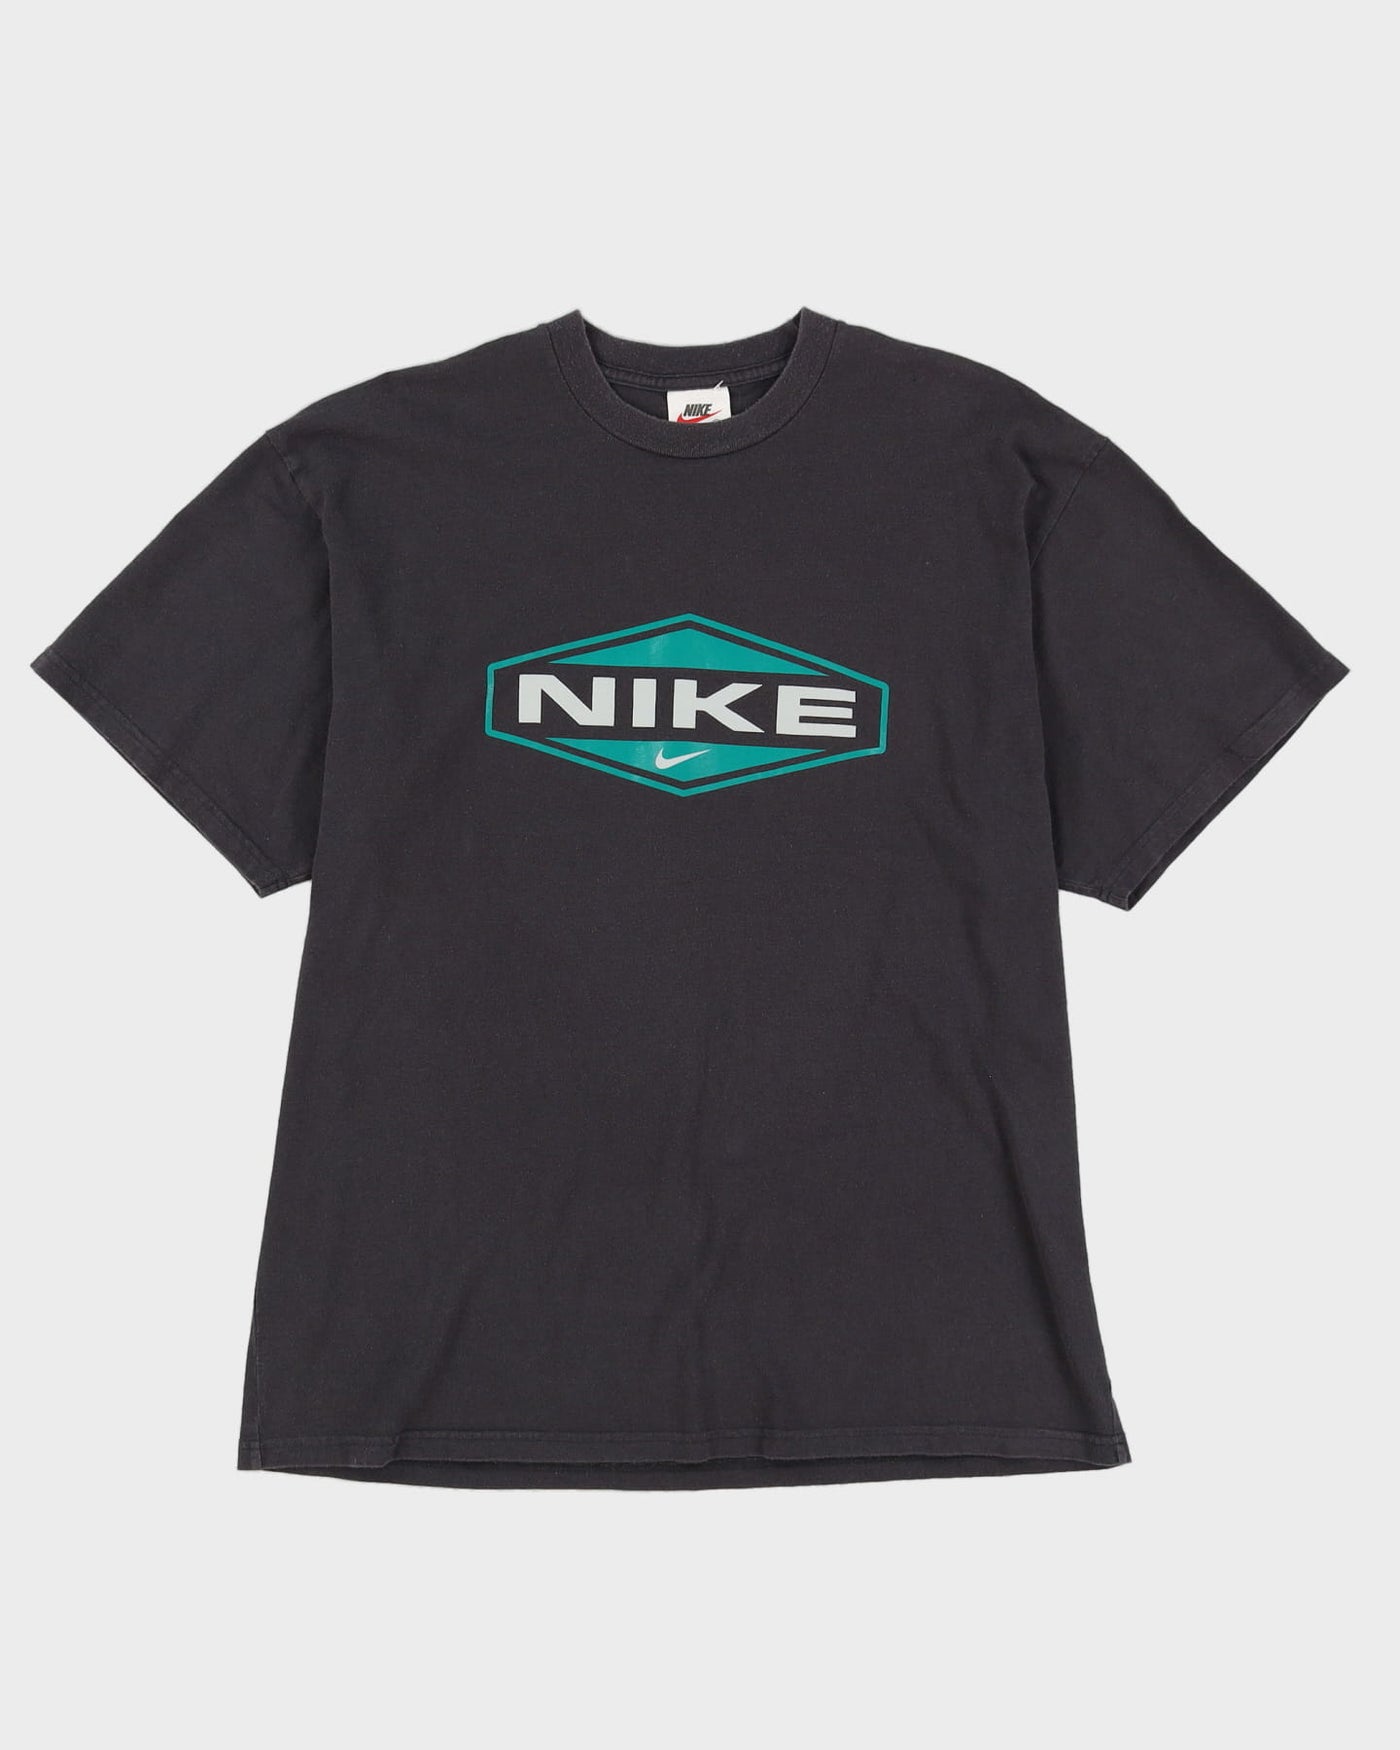 Vintage 90s Nike Grey Double Sided Graphic Oversized T-Shirt - L